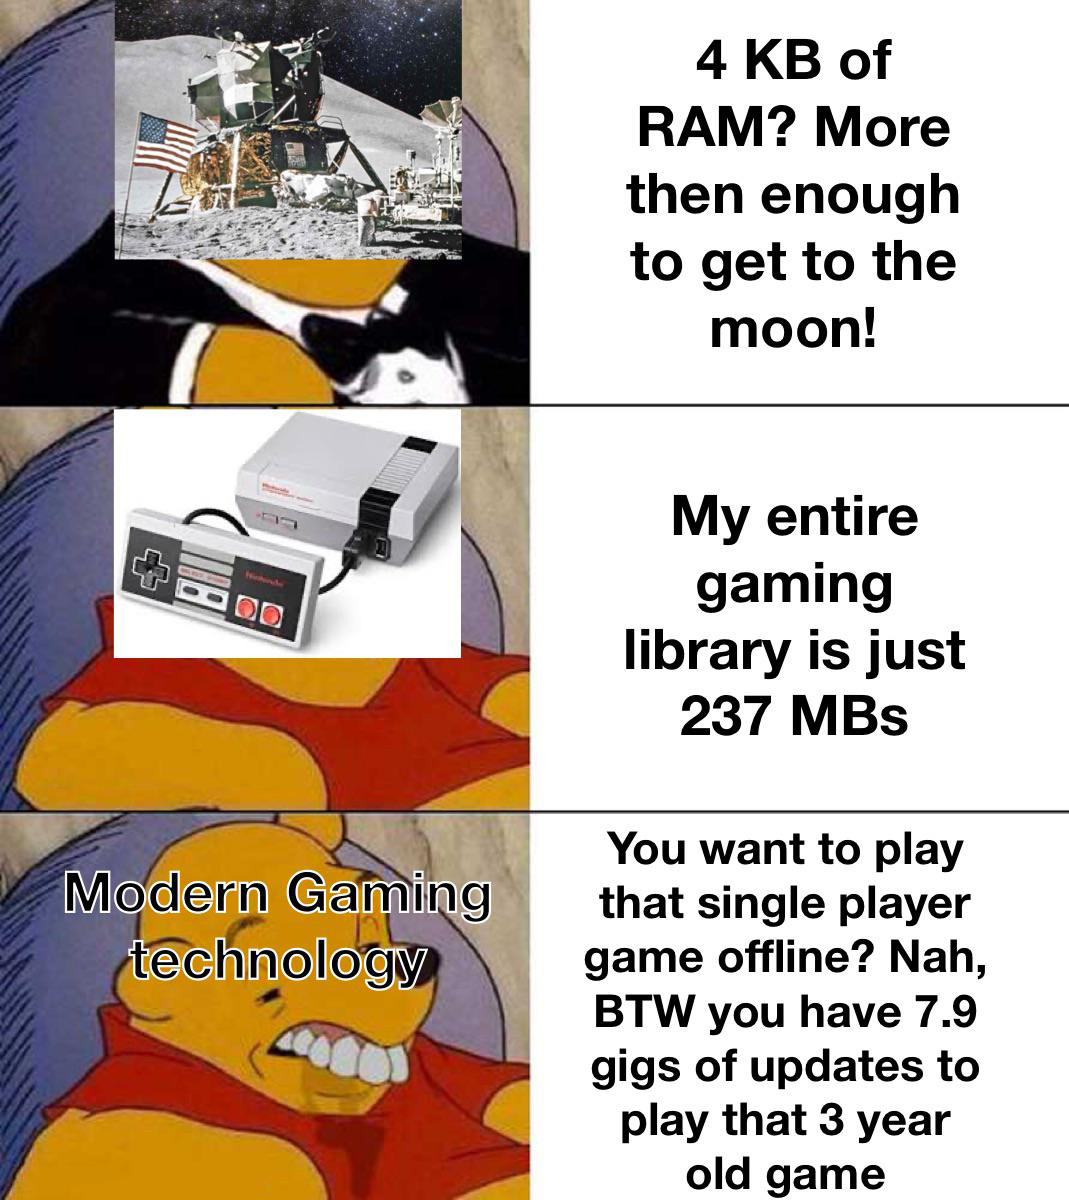 gaming memes - cartoon - Do Modern Gaming technology 4 Kb of Ram? More then enough to get to the moon! My entire gaming library is just 237 MBs You want to play that single player game offline? Nah, Btw you have 7.9 gigs of updates to play that 3 year old